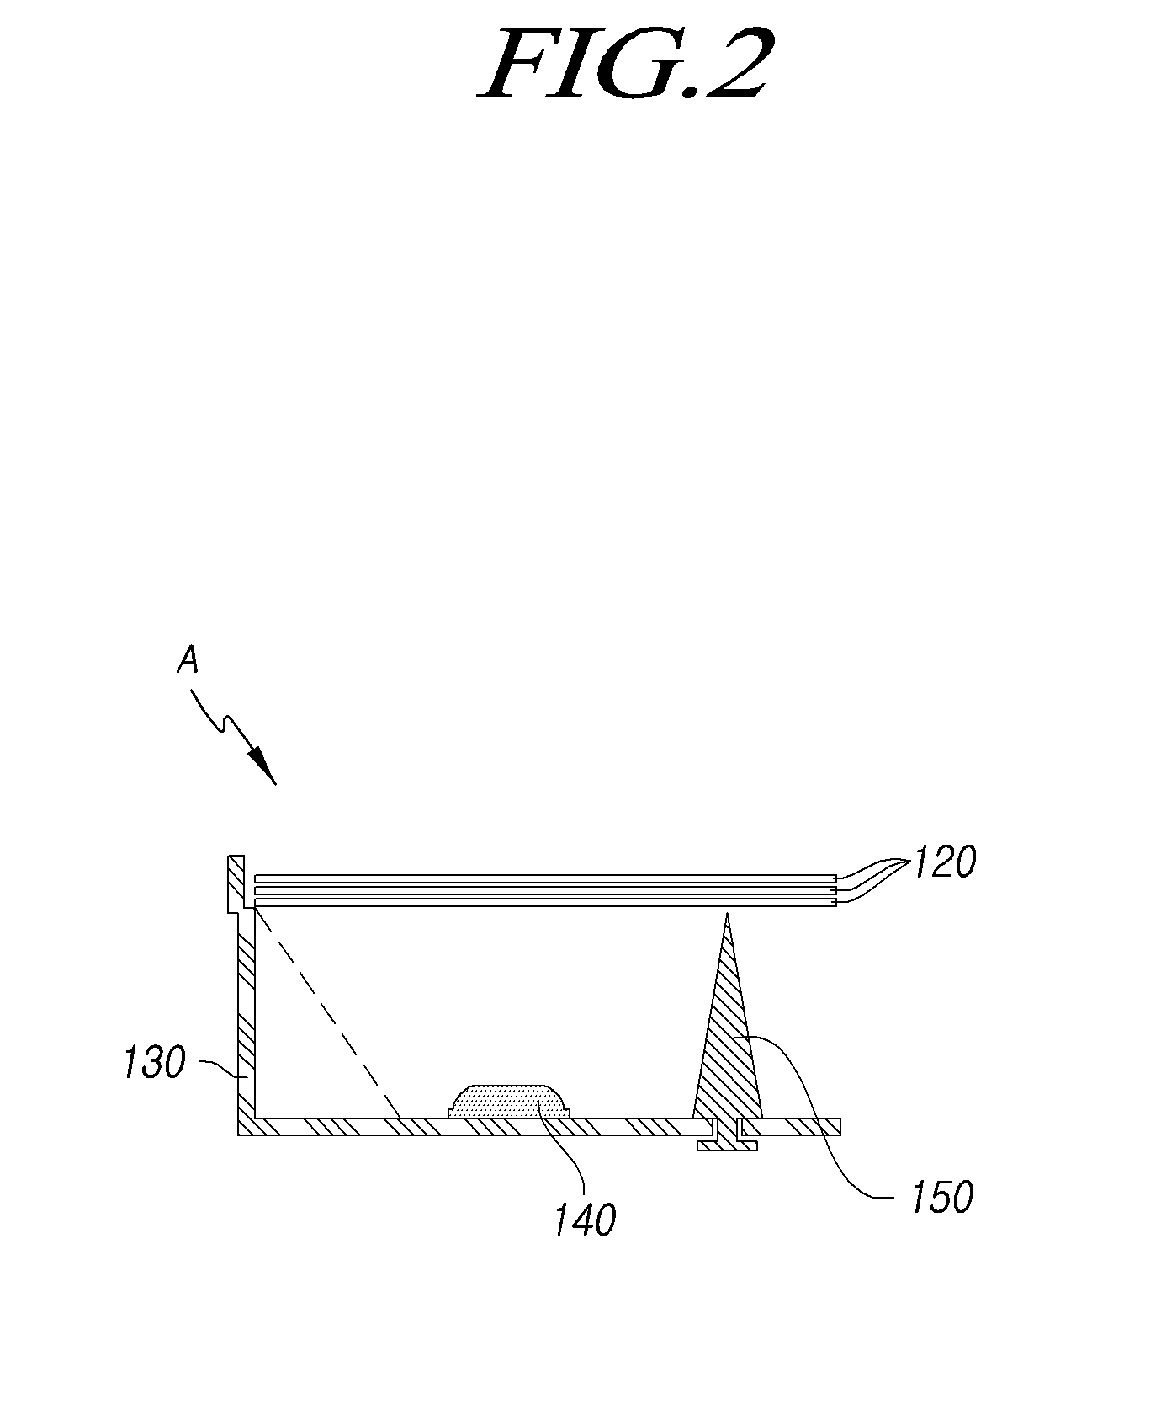 Diffuser plate supporter, backlight unit, and electronic device